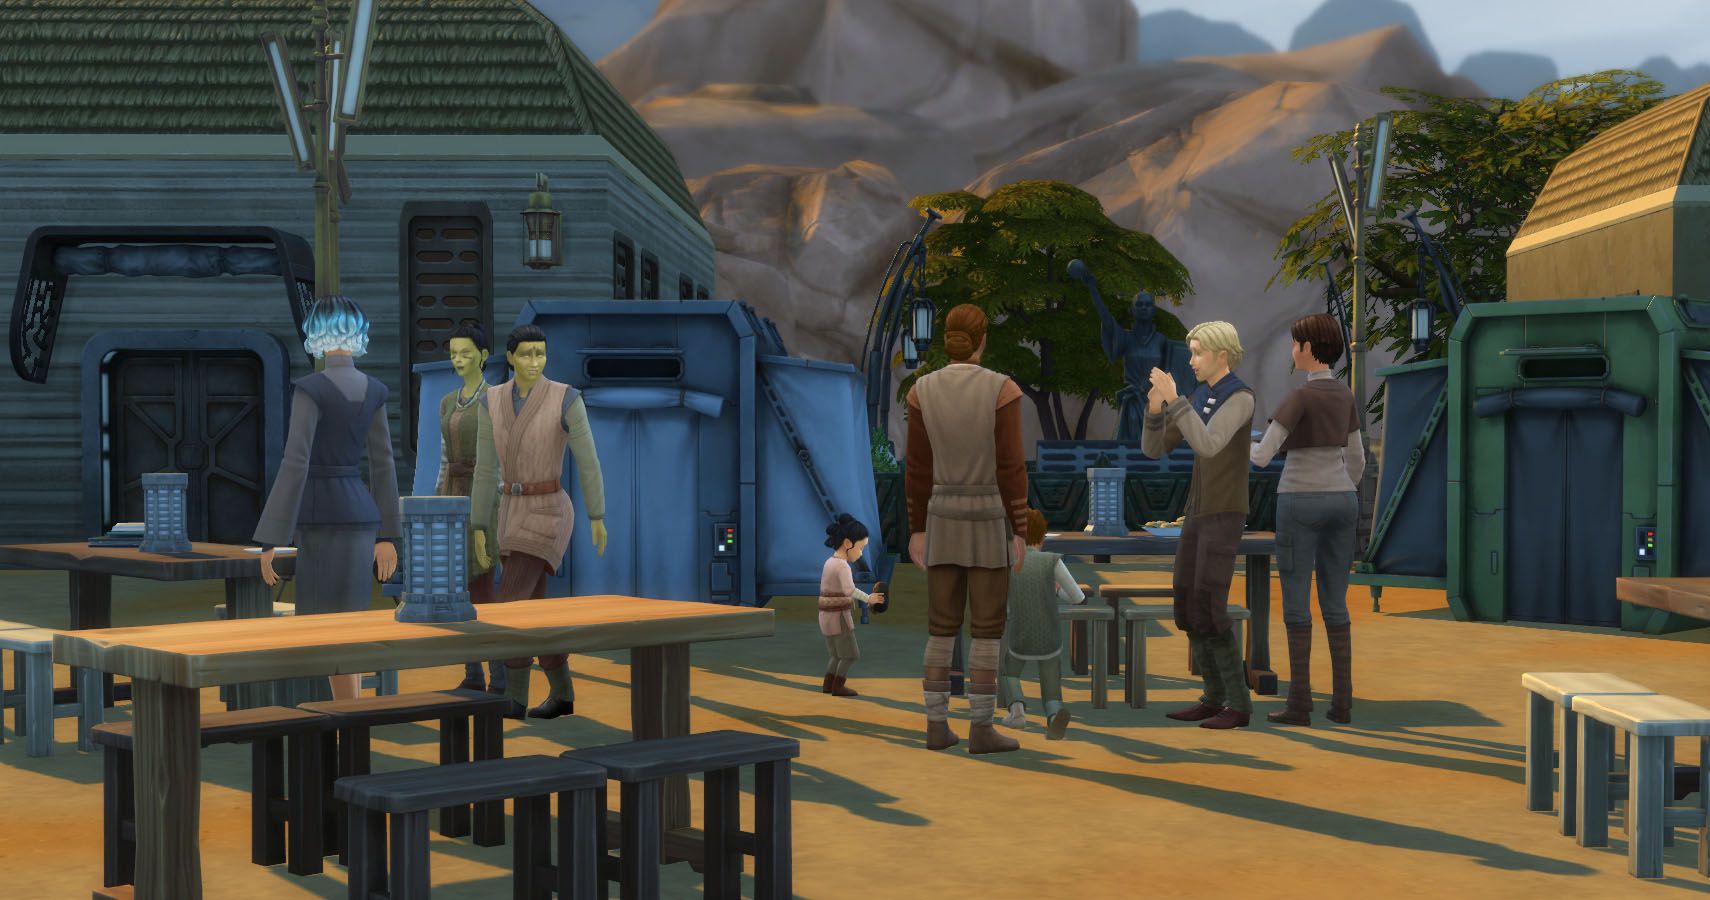 Several sims of different ages in a Resistence style camp in Oasis Springs.